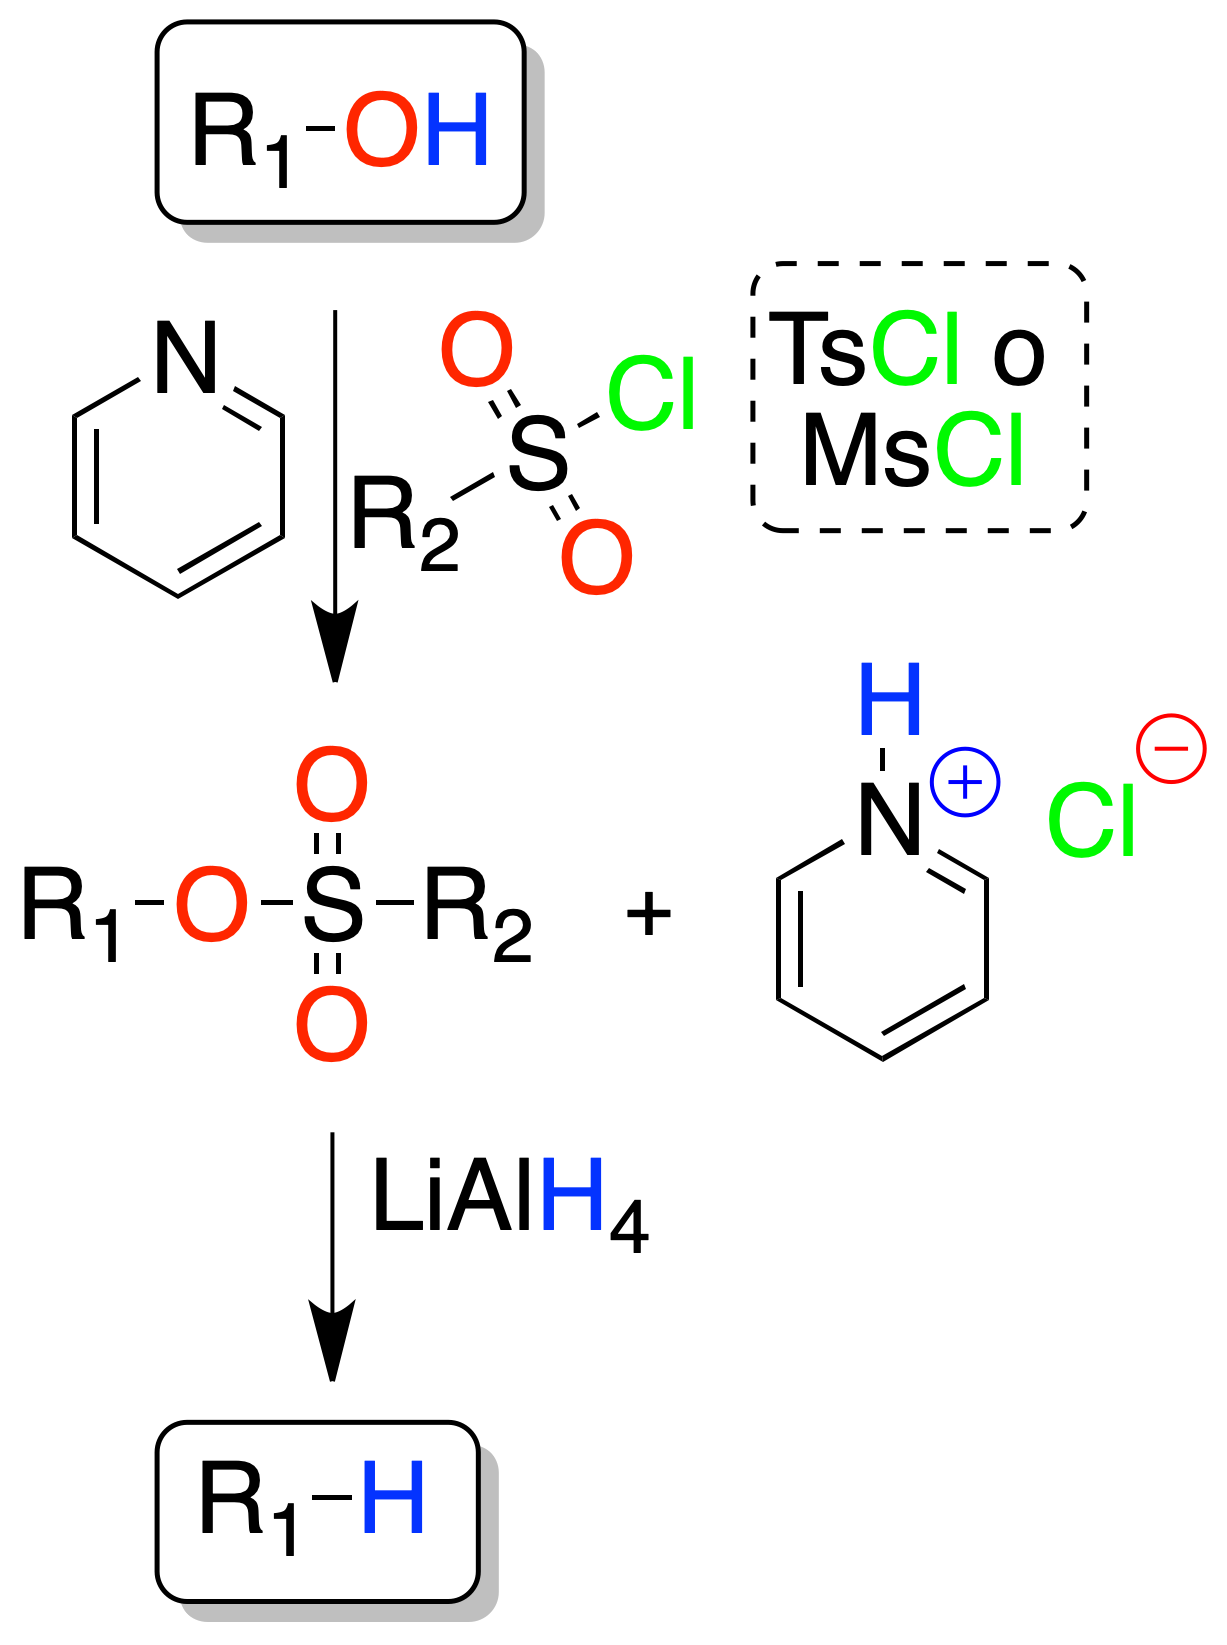 Reactions of Alcohols, Ethers and Oxiranes: Deoxygenation of alcohols (reduction); Sulfonate-mediated reactions